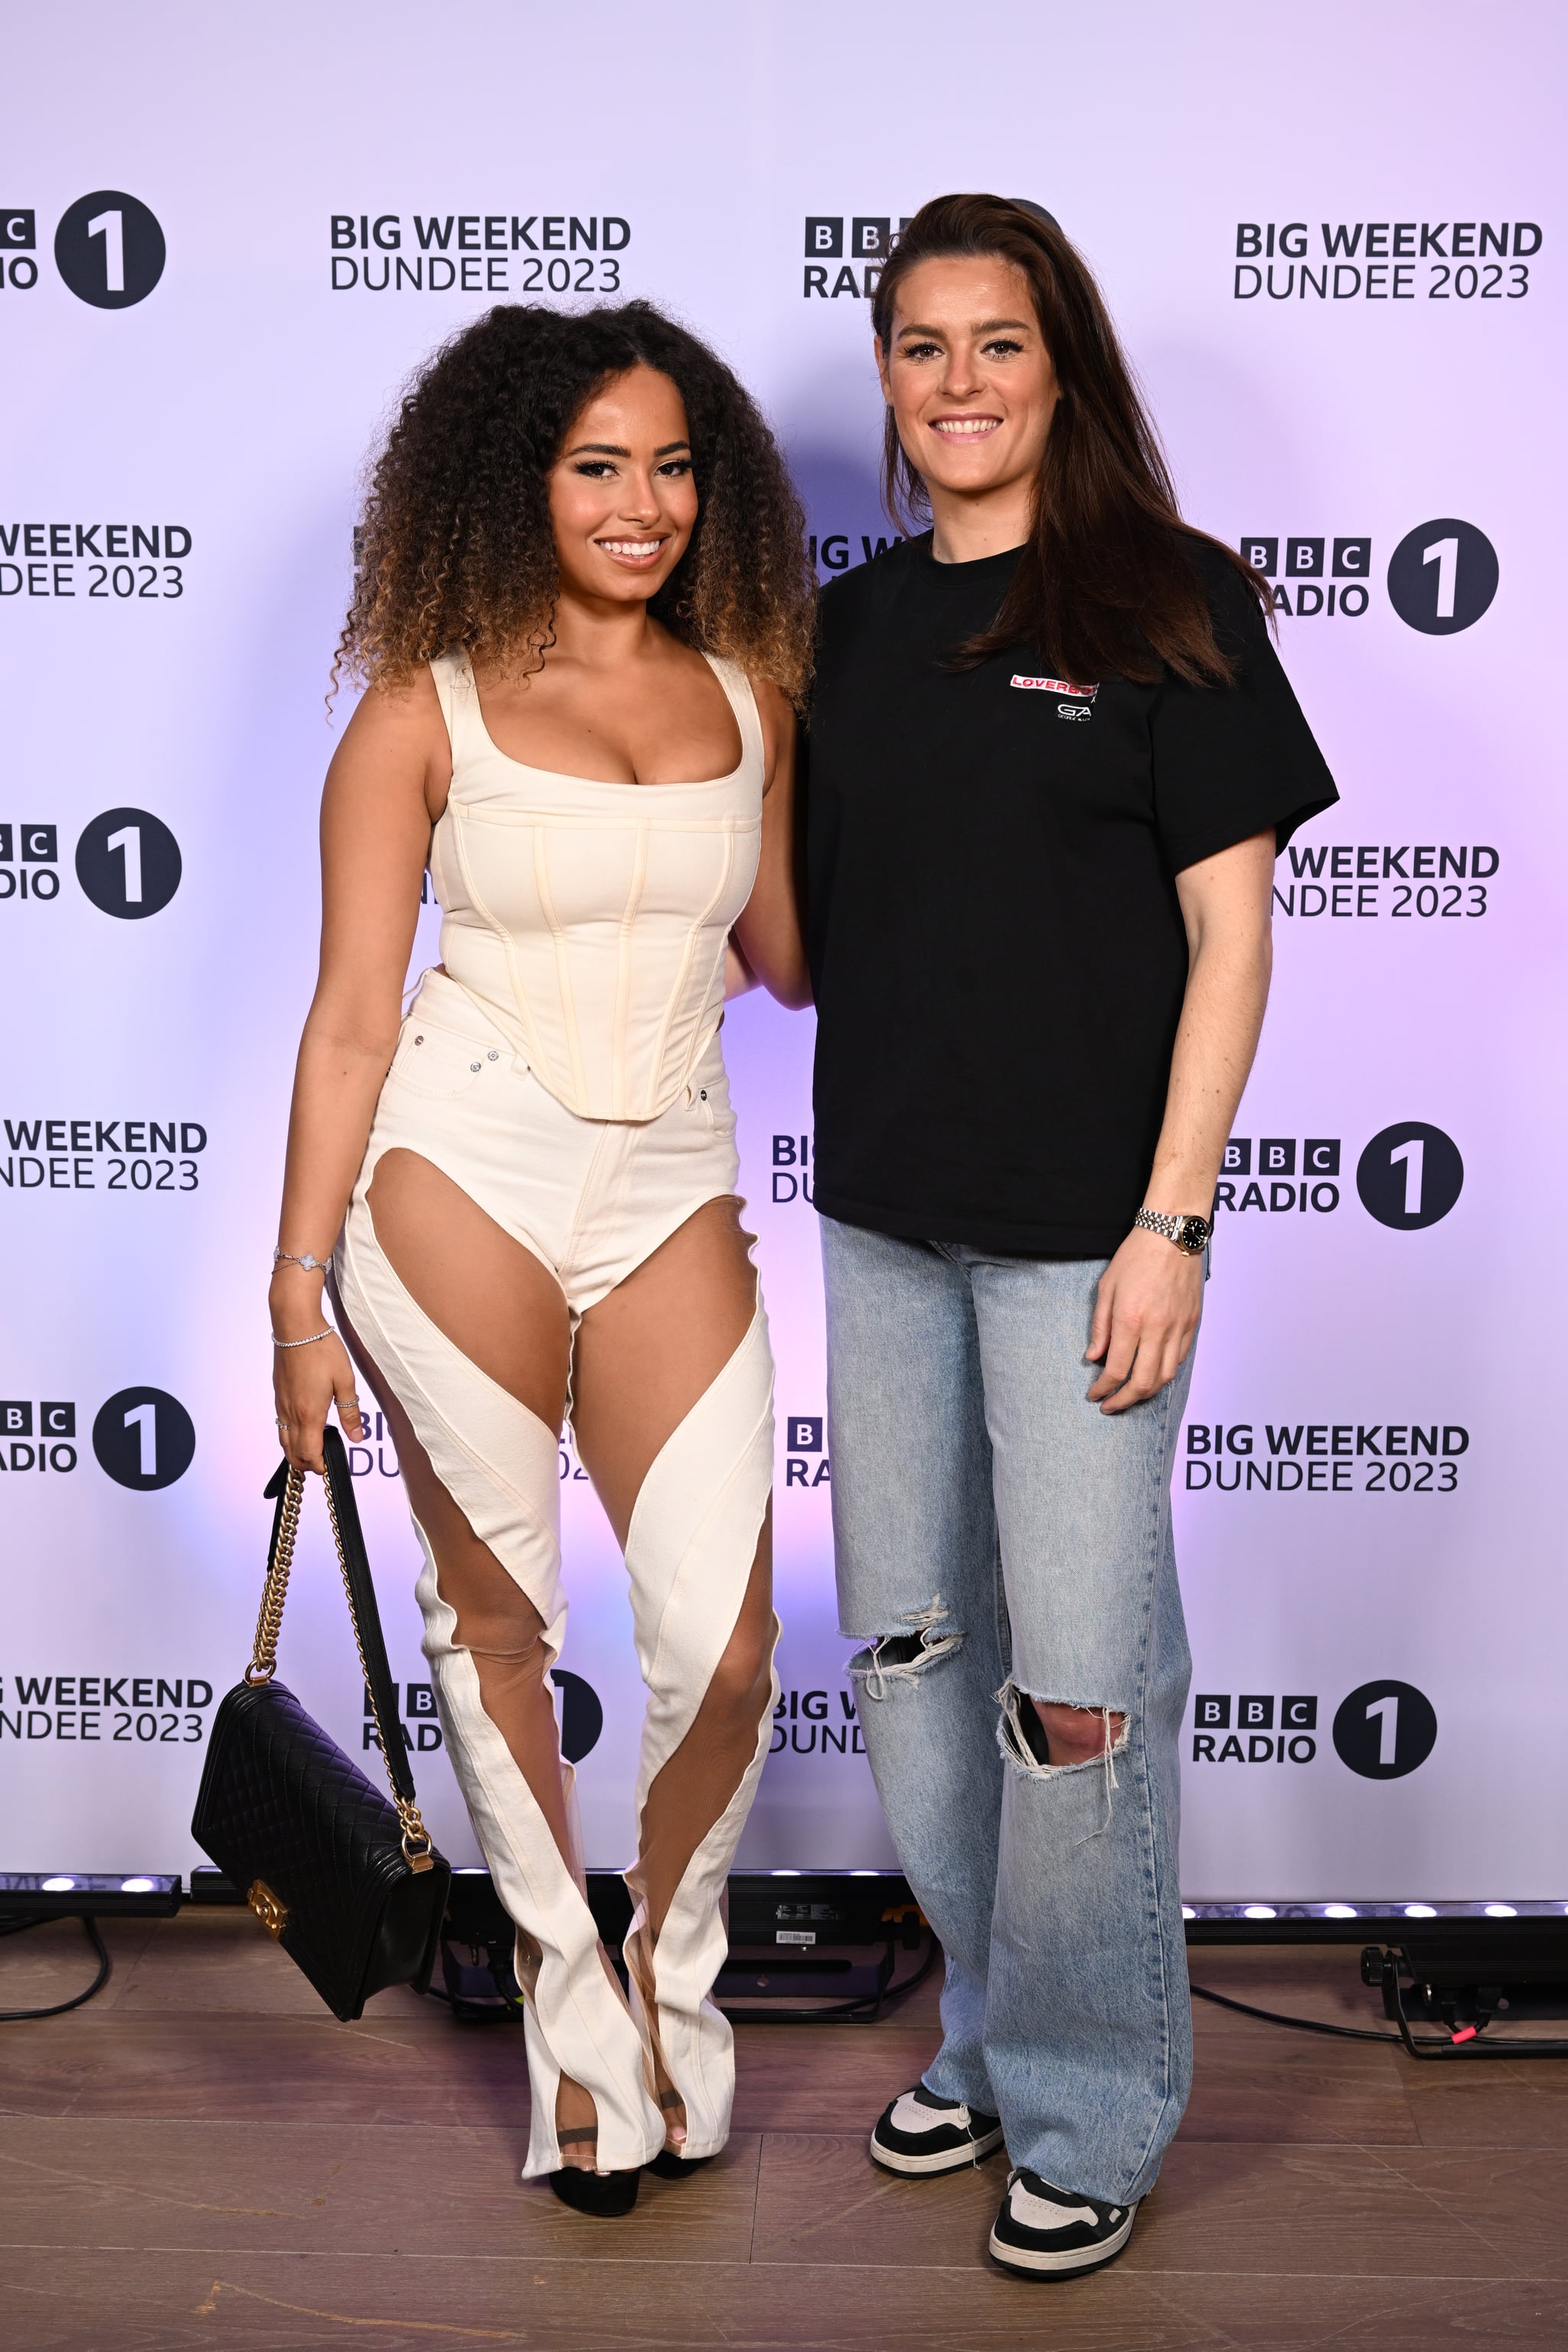 "Love Island" star Amber Gill and Jen Beattie attend Radio 1's Big Weekend Launch Party (Photo by Jeff Spicer/Getty Images)